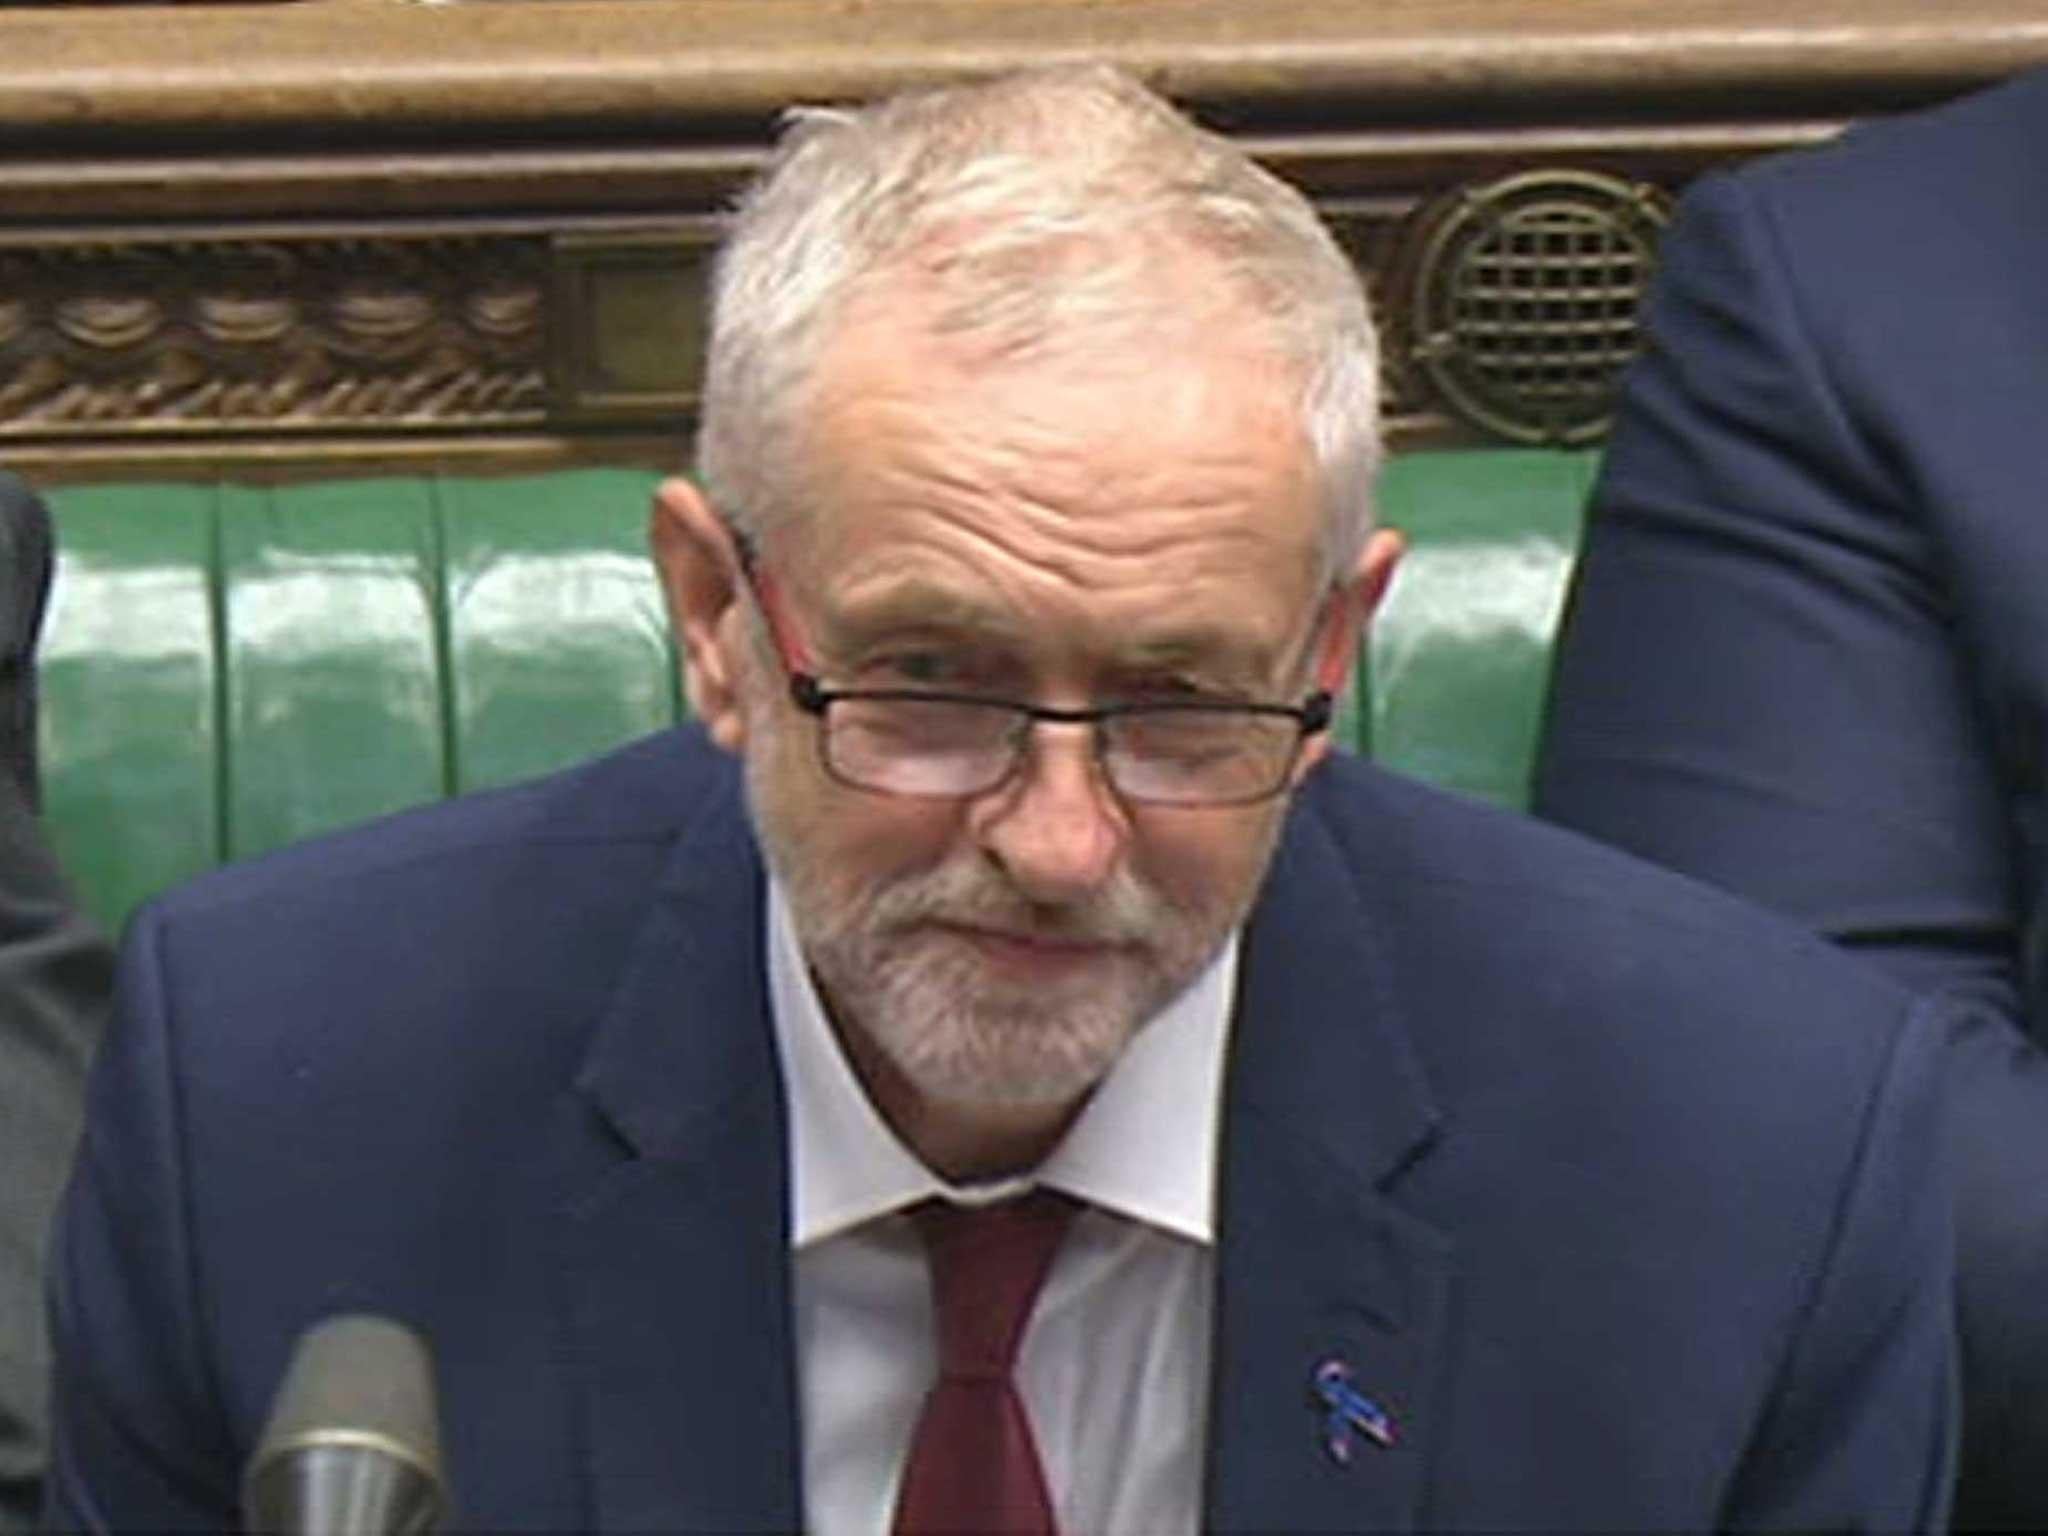 Jeremy Corbyn during Prime Minister’s Questions